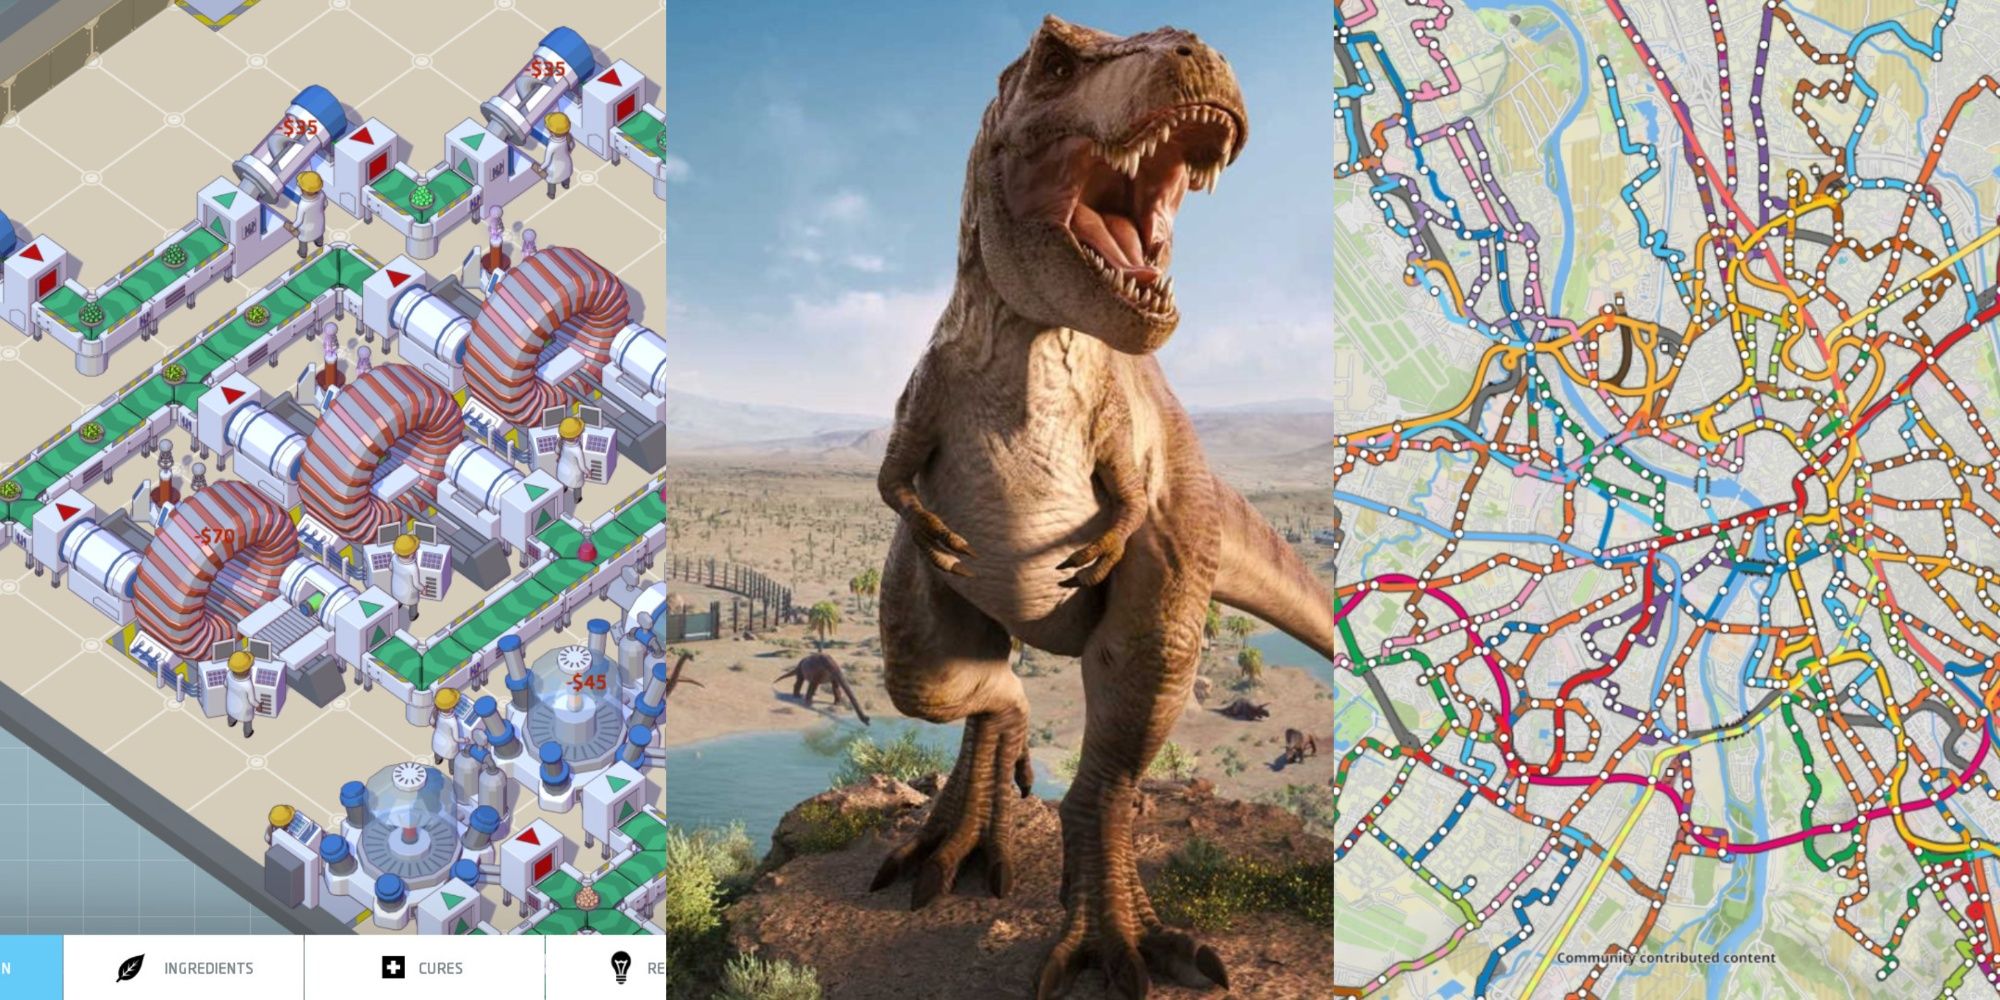 A trisplit of the factory in Big Pharma, a T Rex from Jurassic World Evolution 2 and the map in NIMBY Rails